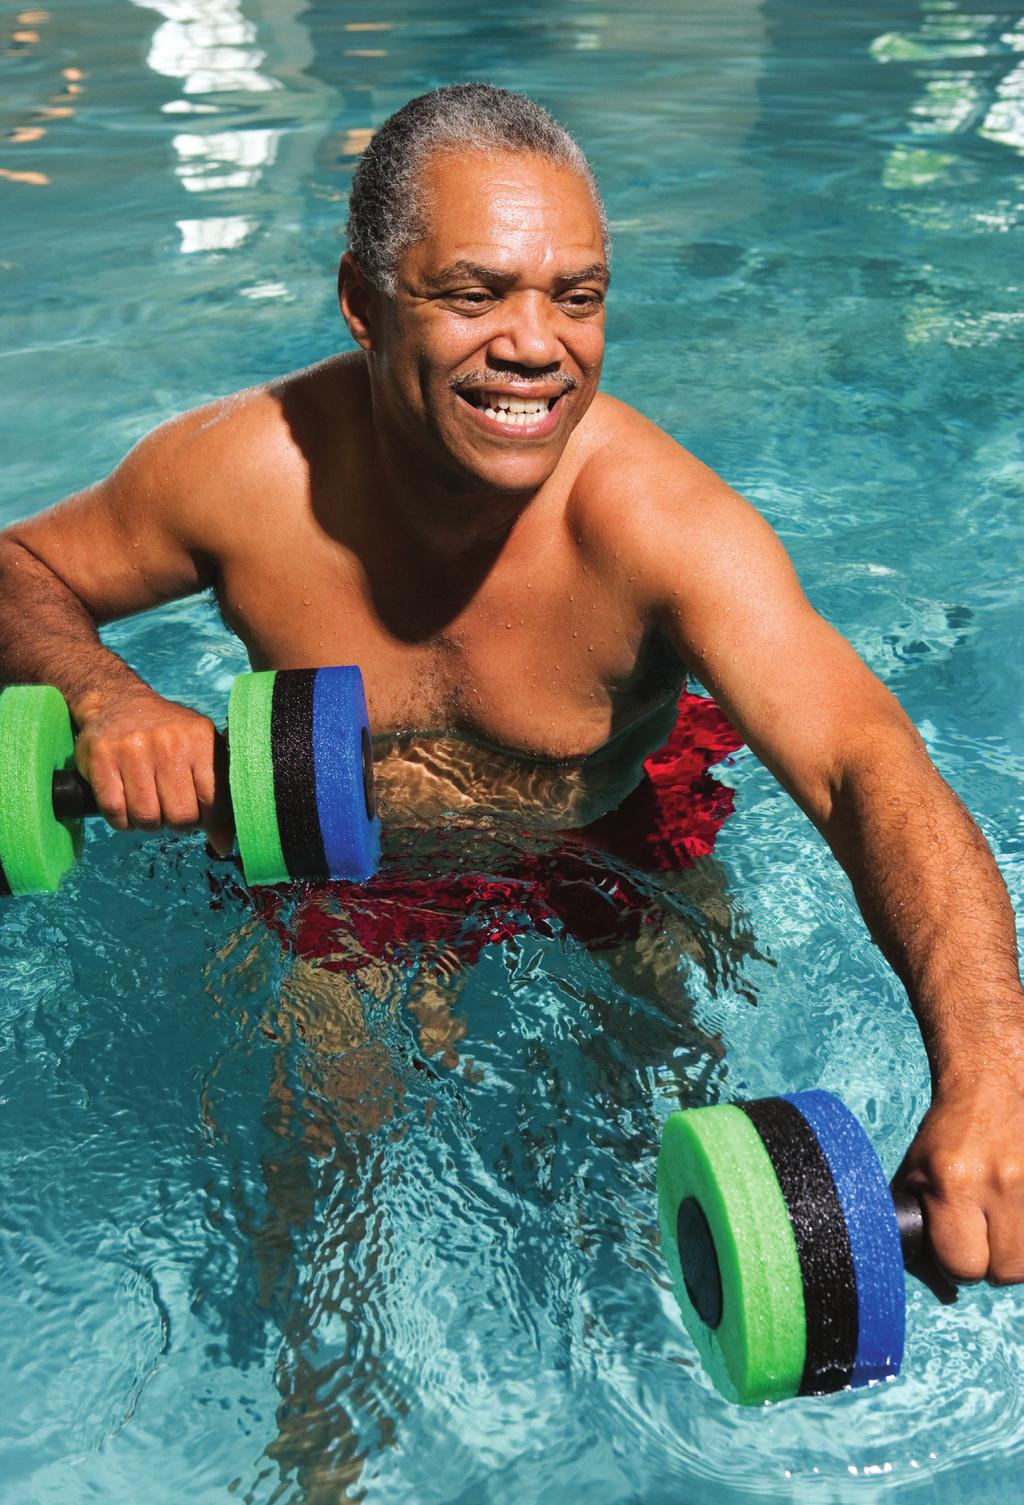 FREE SWIM AND GYM SCHEME If you are over 60 and a Southwark resident you can register for our free swim and gym scheme.